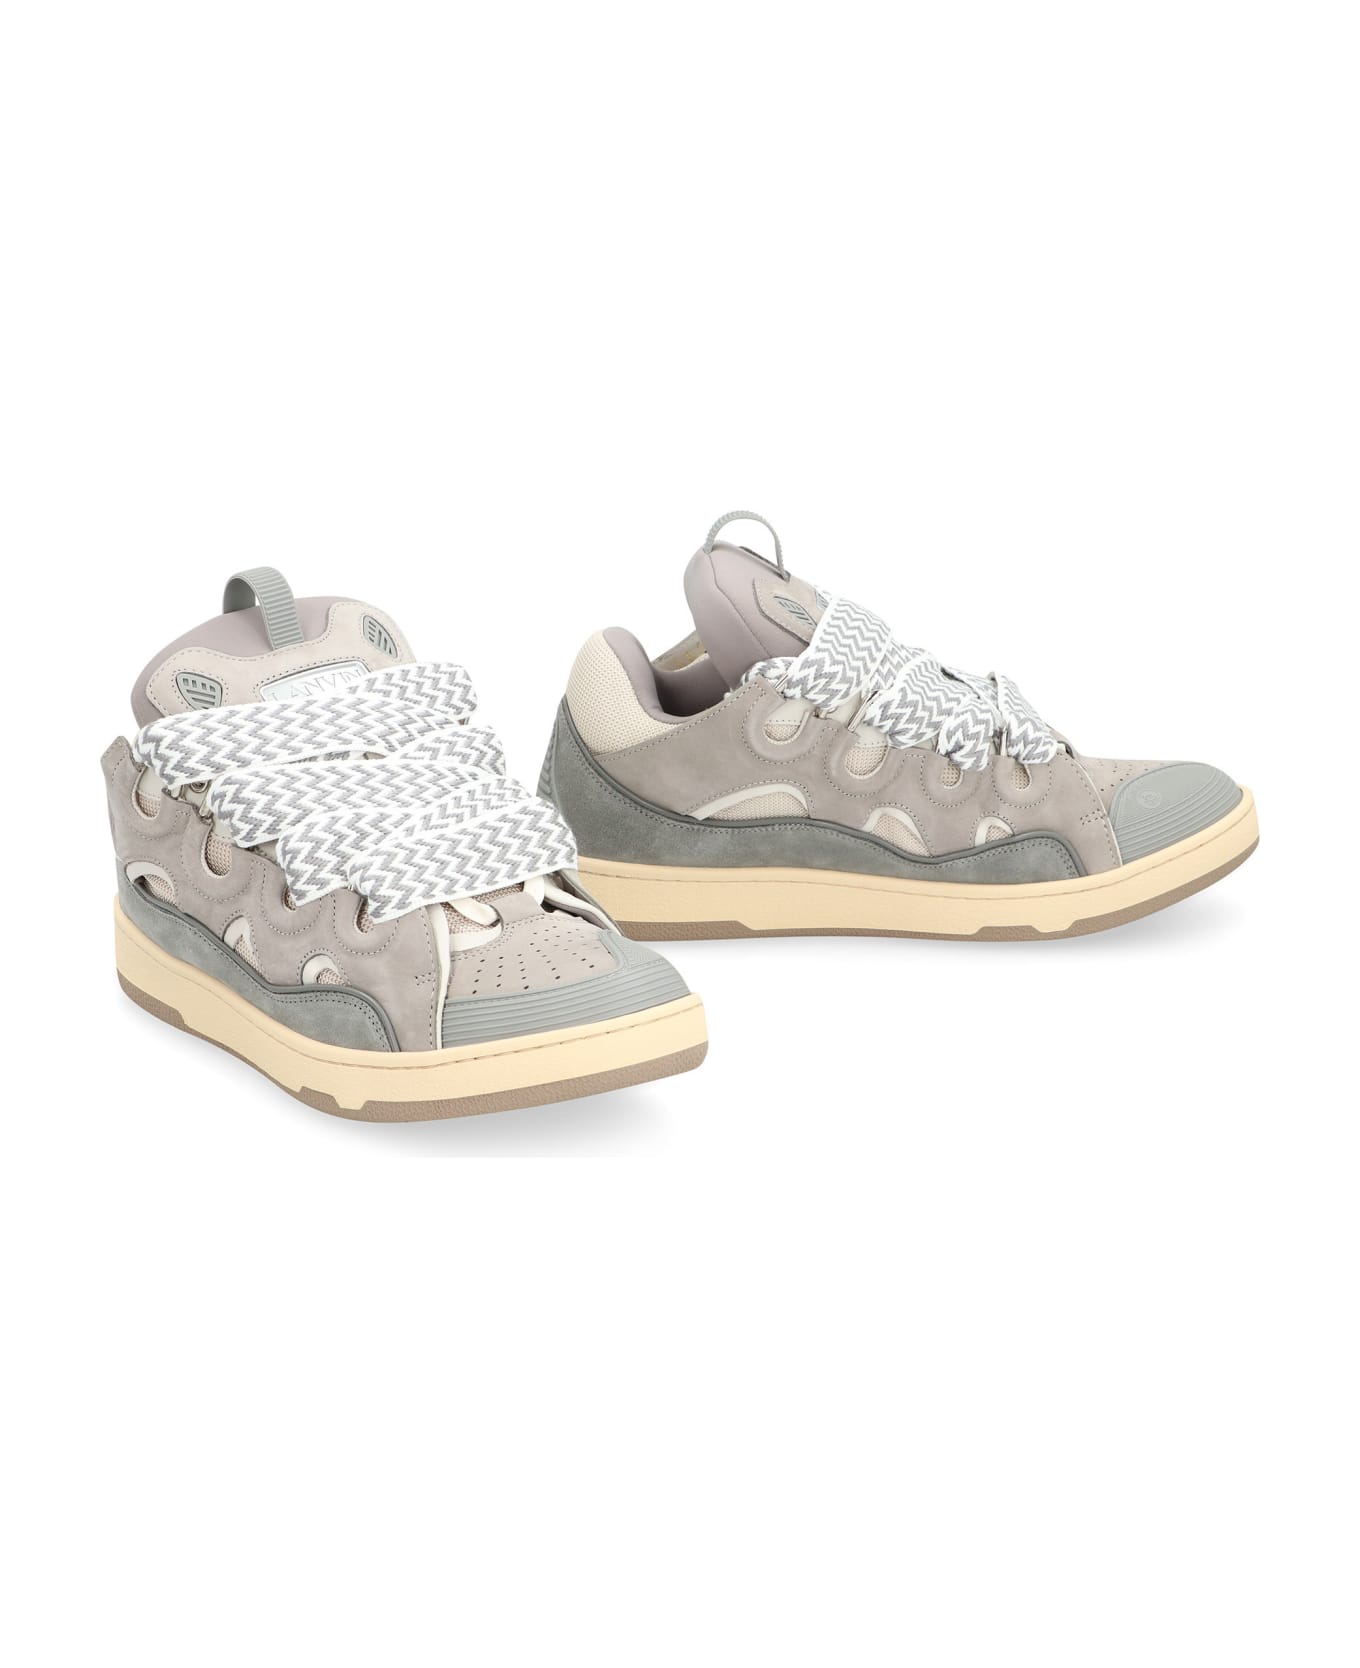 Lanvin Curb Leather Sneakers - Grey